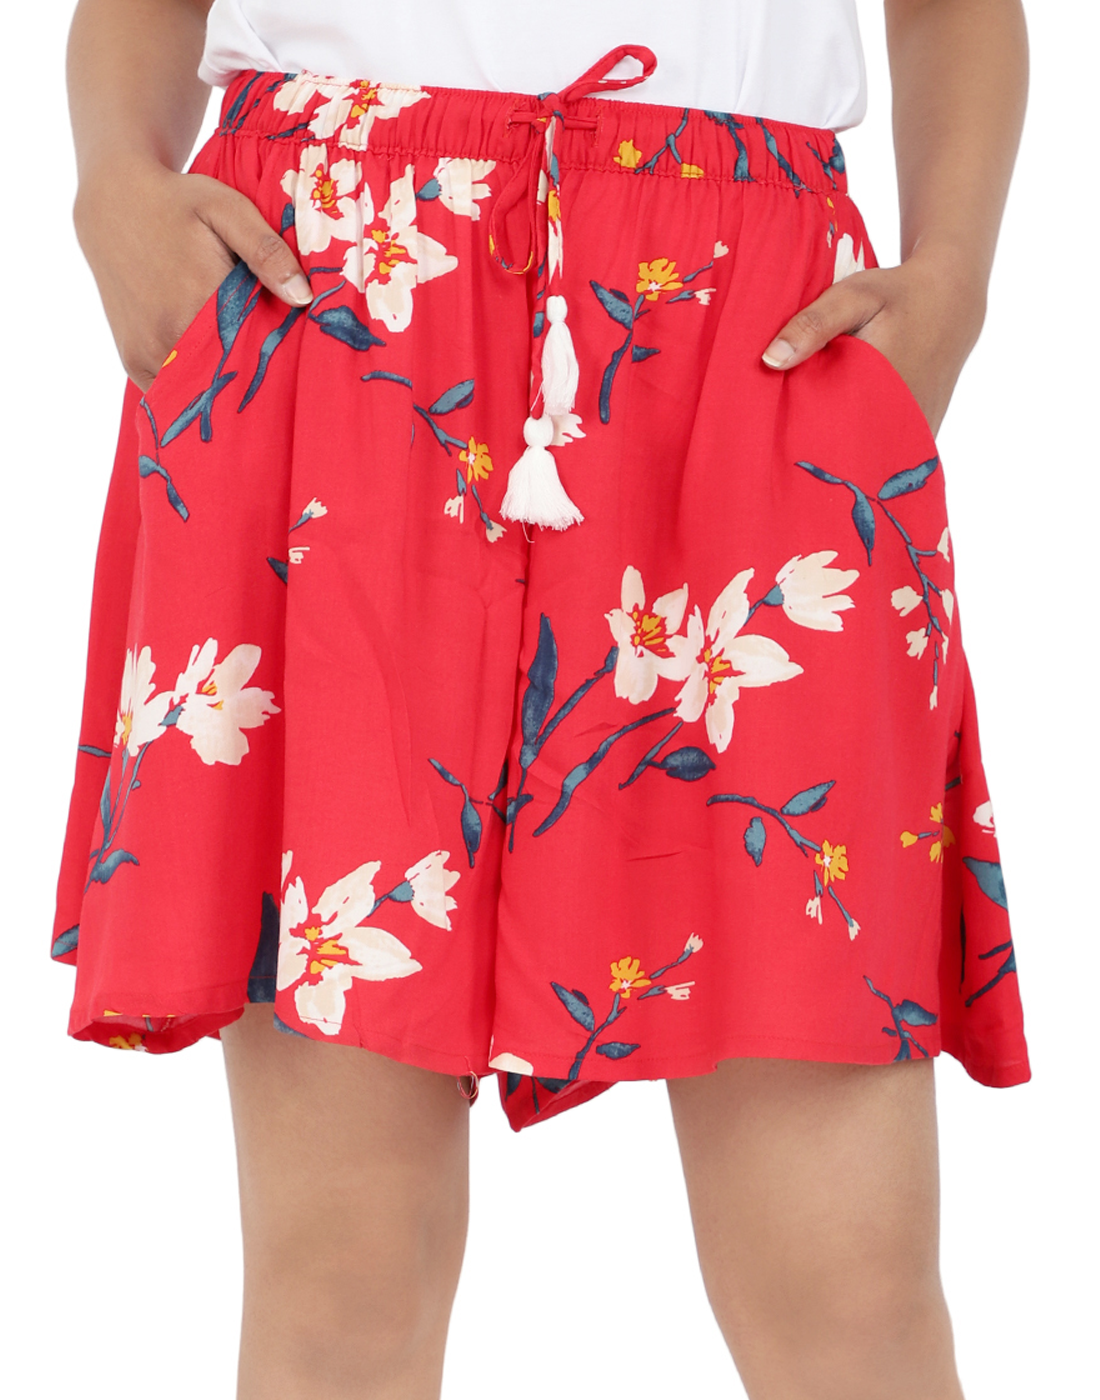 Culottes Shorts for Women-Red Floral